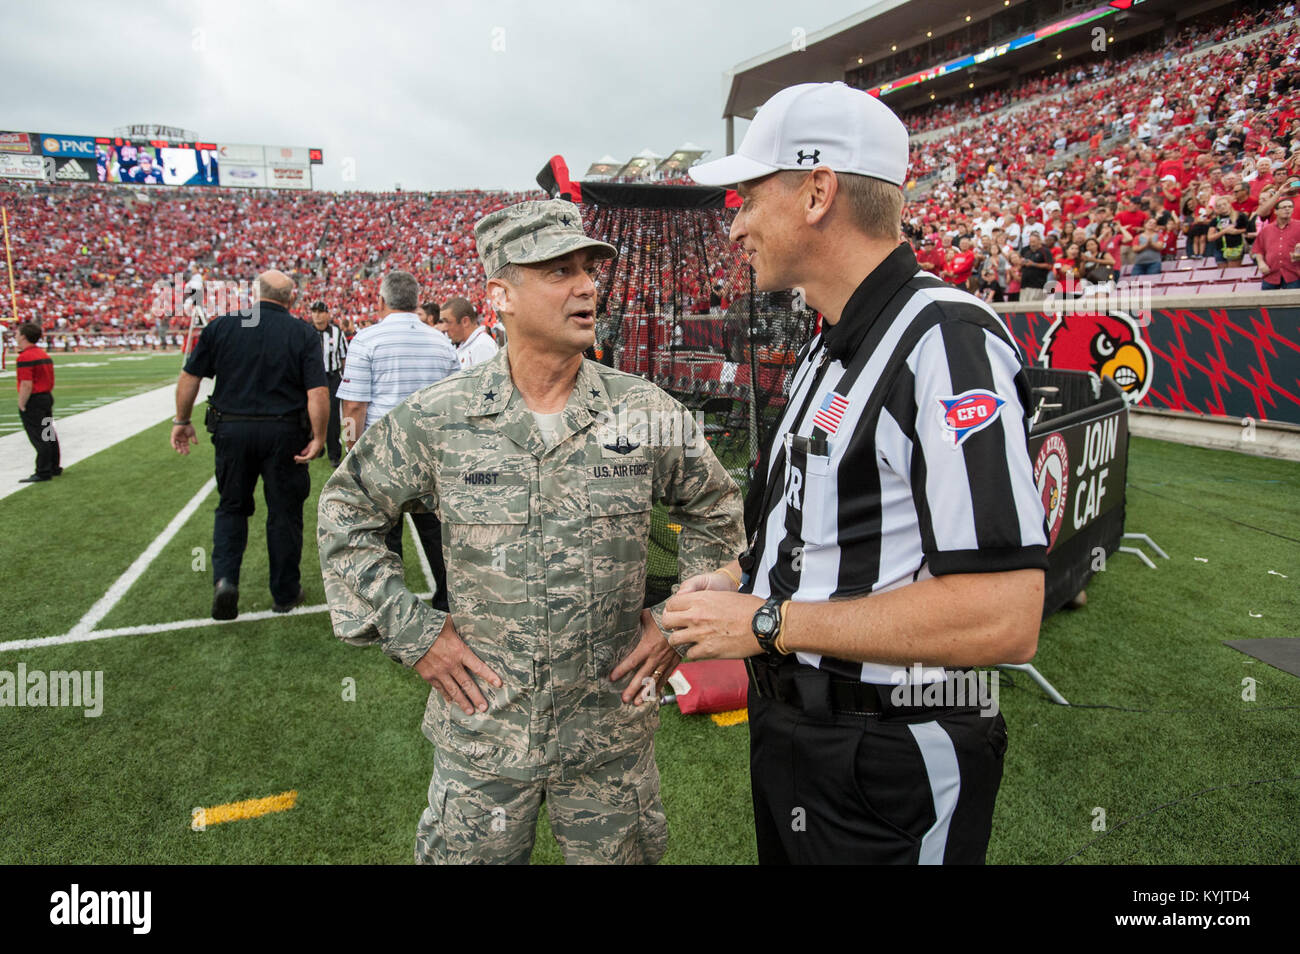 Air Force Brig. Gen. Warren Hurst, the Kentucky National Guard's assistant adjutant general for Air and commander of the Kentucky Air National Guard, speaks with head referee Jeff Heaser at Papa John’s Cardinal Stadium in Louisville, Ky., prior to the University of Louisville – Murray State football game Sept. 6, 2014. The game, billed as Military Appreciation Day, began with a coin toss executed Hurst. (U.S. Air National Guard photo by Maj. Dale Greer/Released) Stock Photo